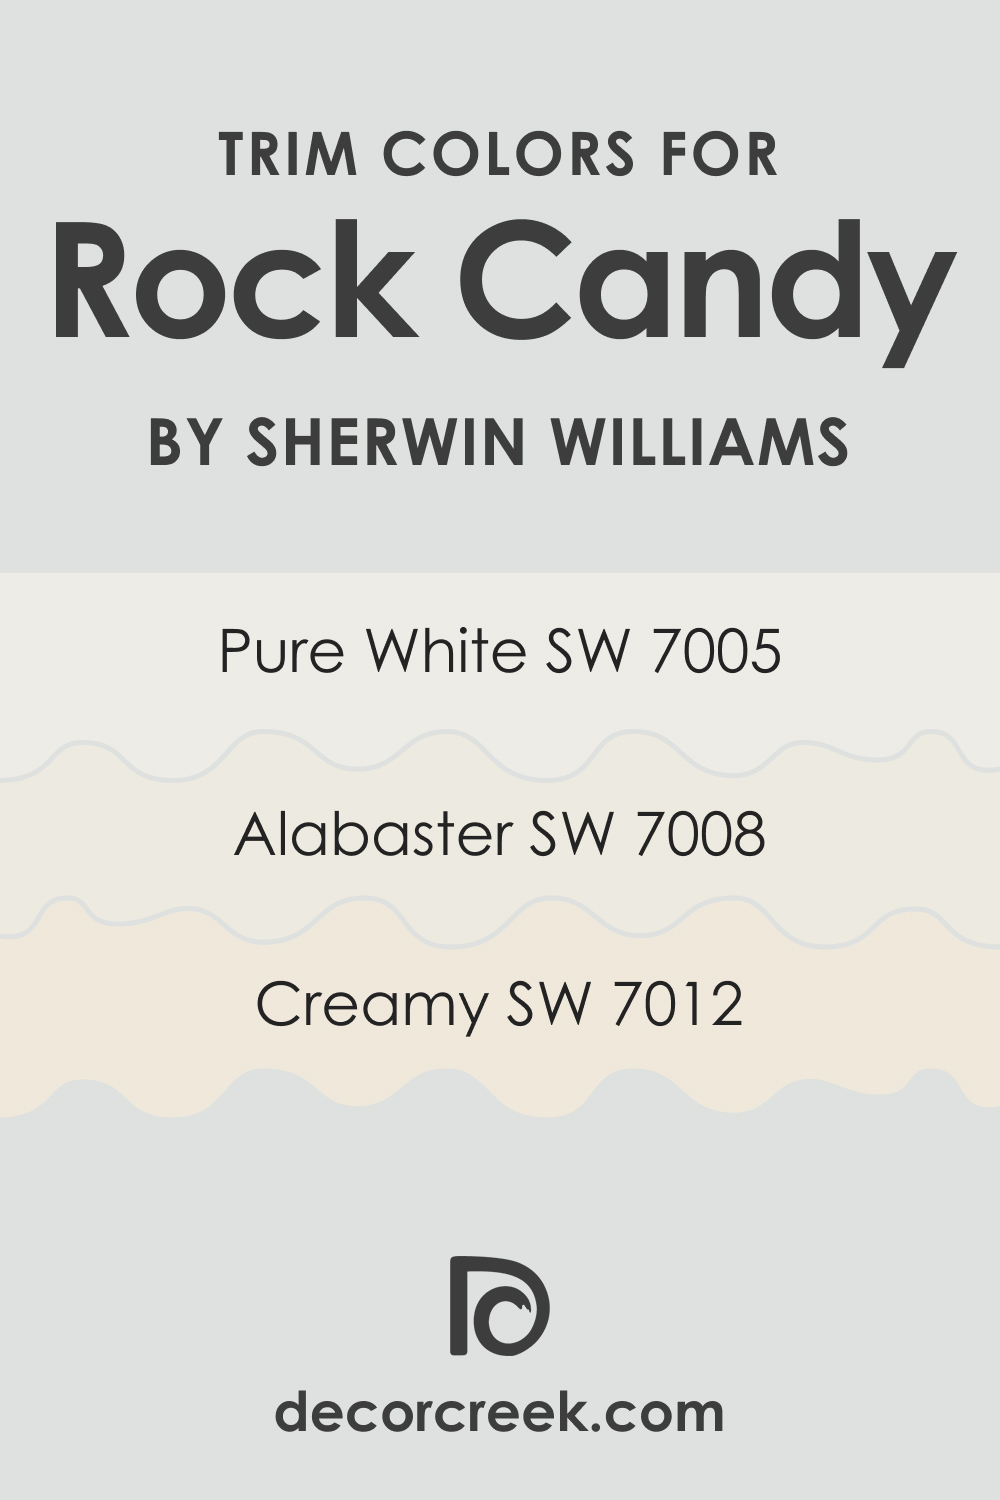 Trim Colors of SW 6231 Rock Candy